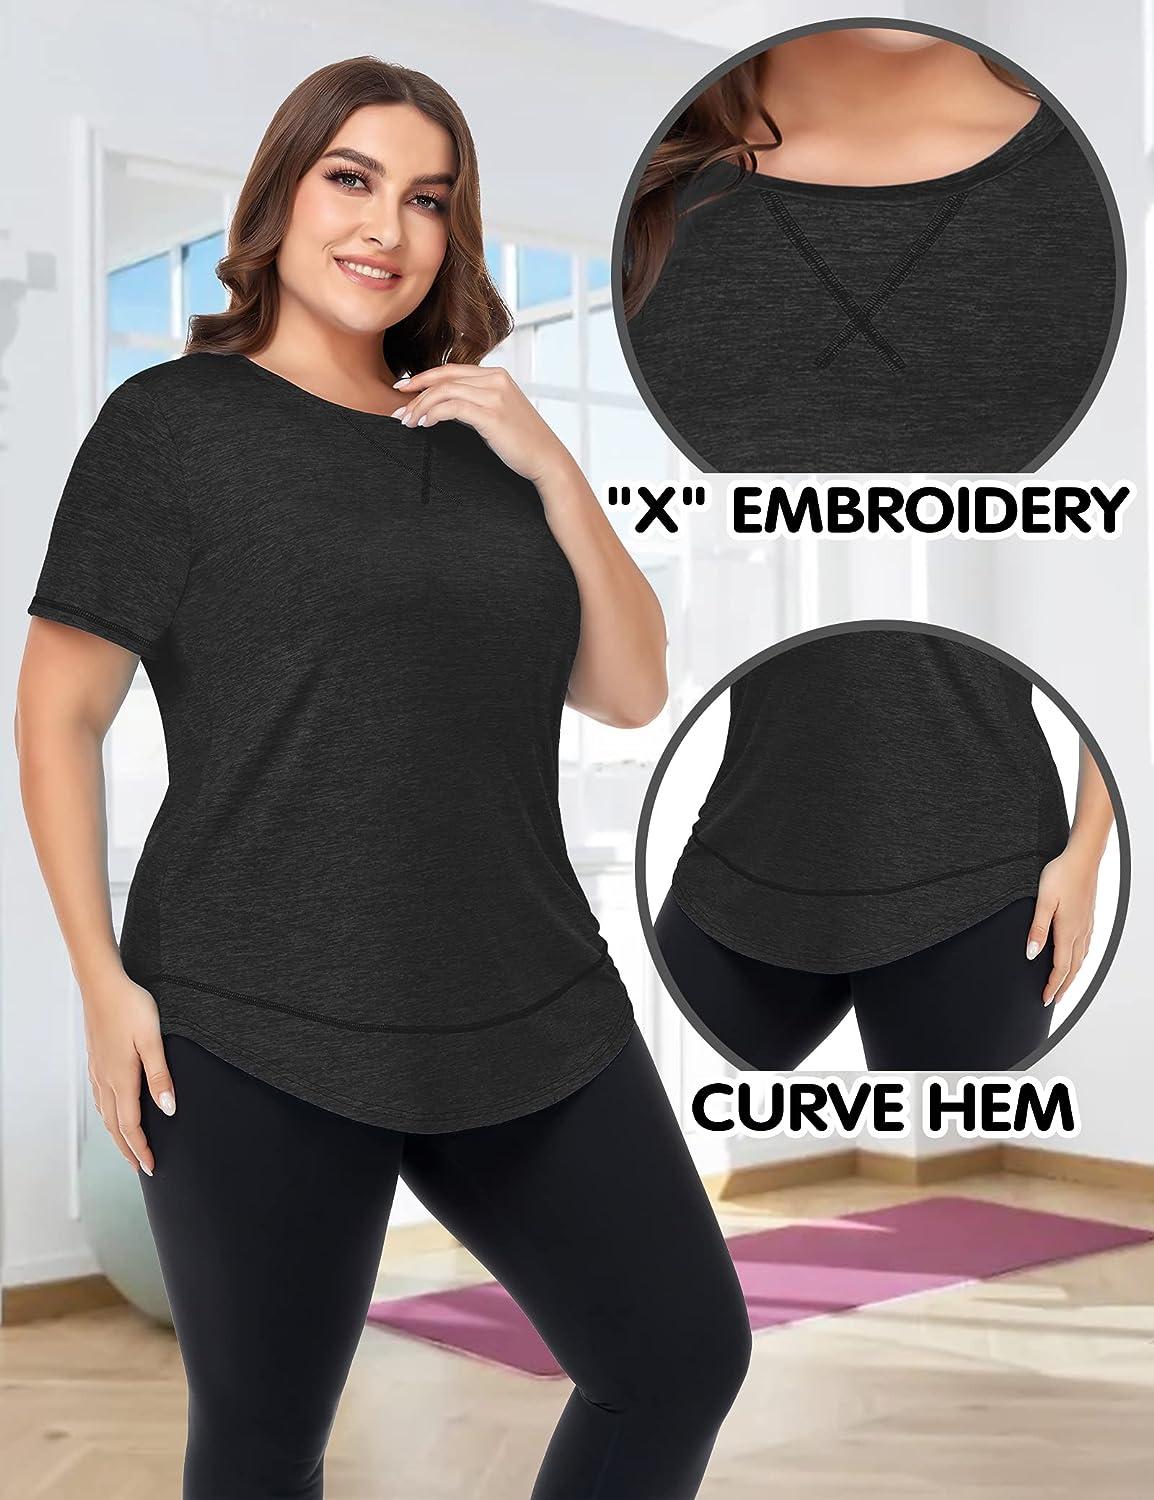 COOTRY Plus Size Workout Tops for Women Short Sleeve Loose fit